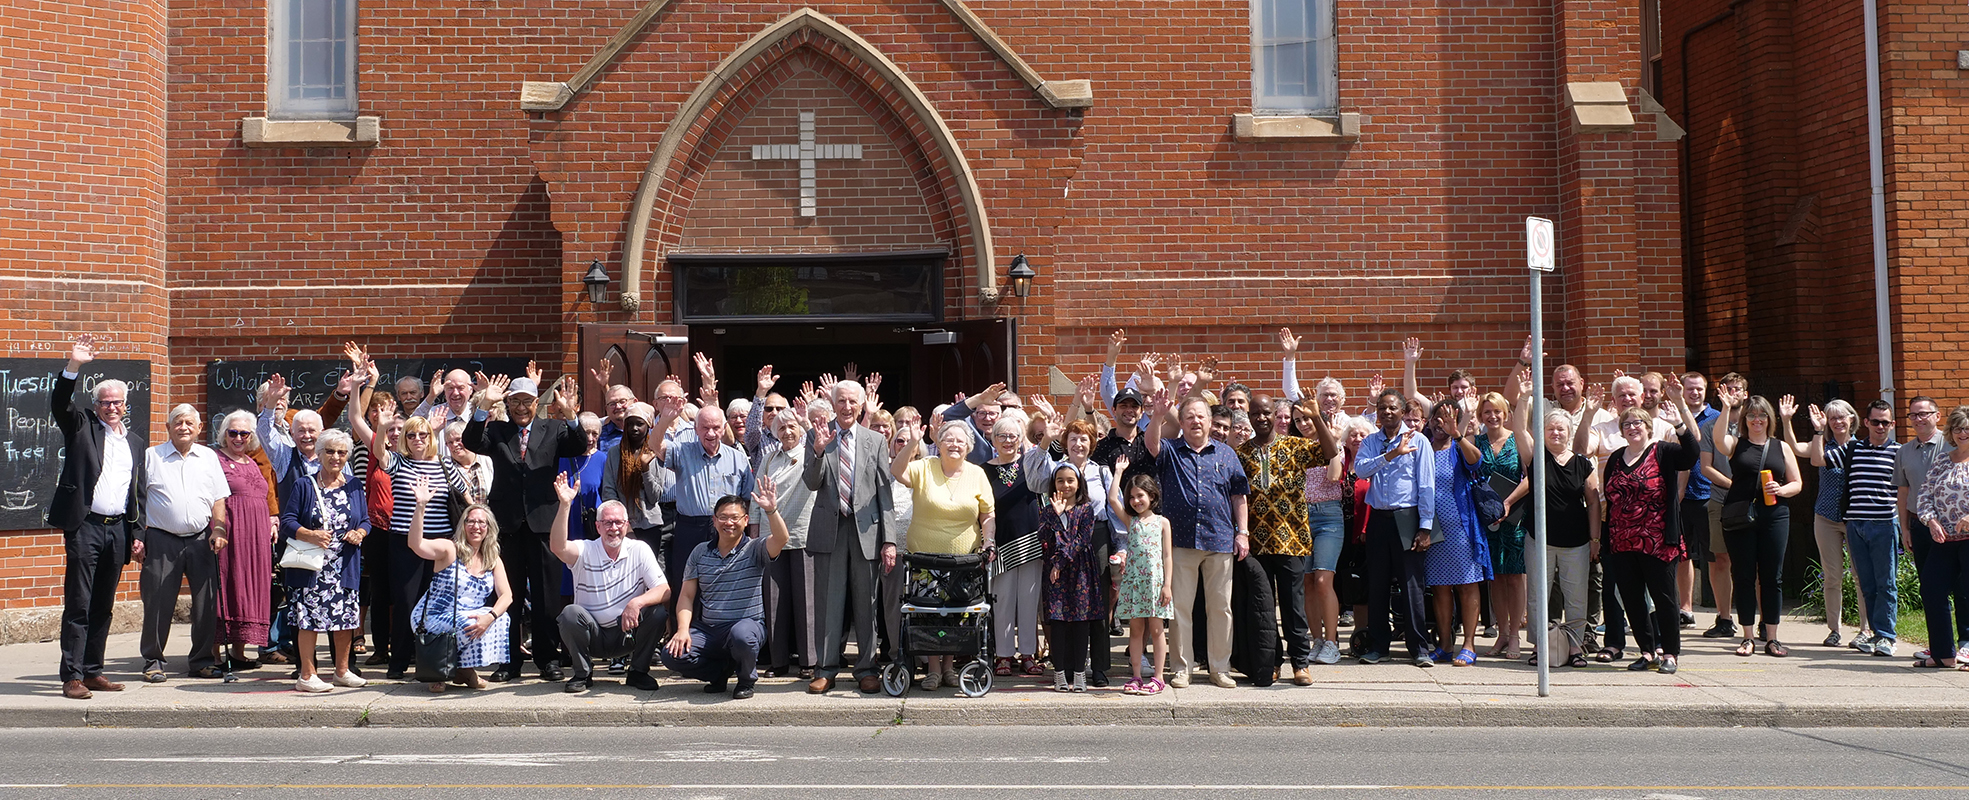 Trinity Lutheran Church congregation members standing outside of the church and all waving